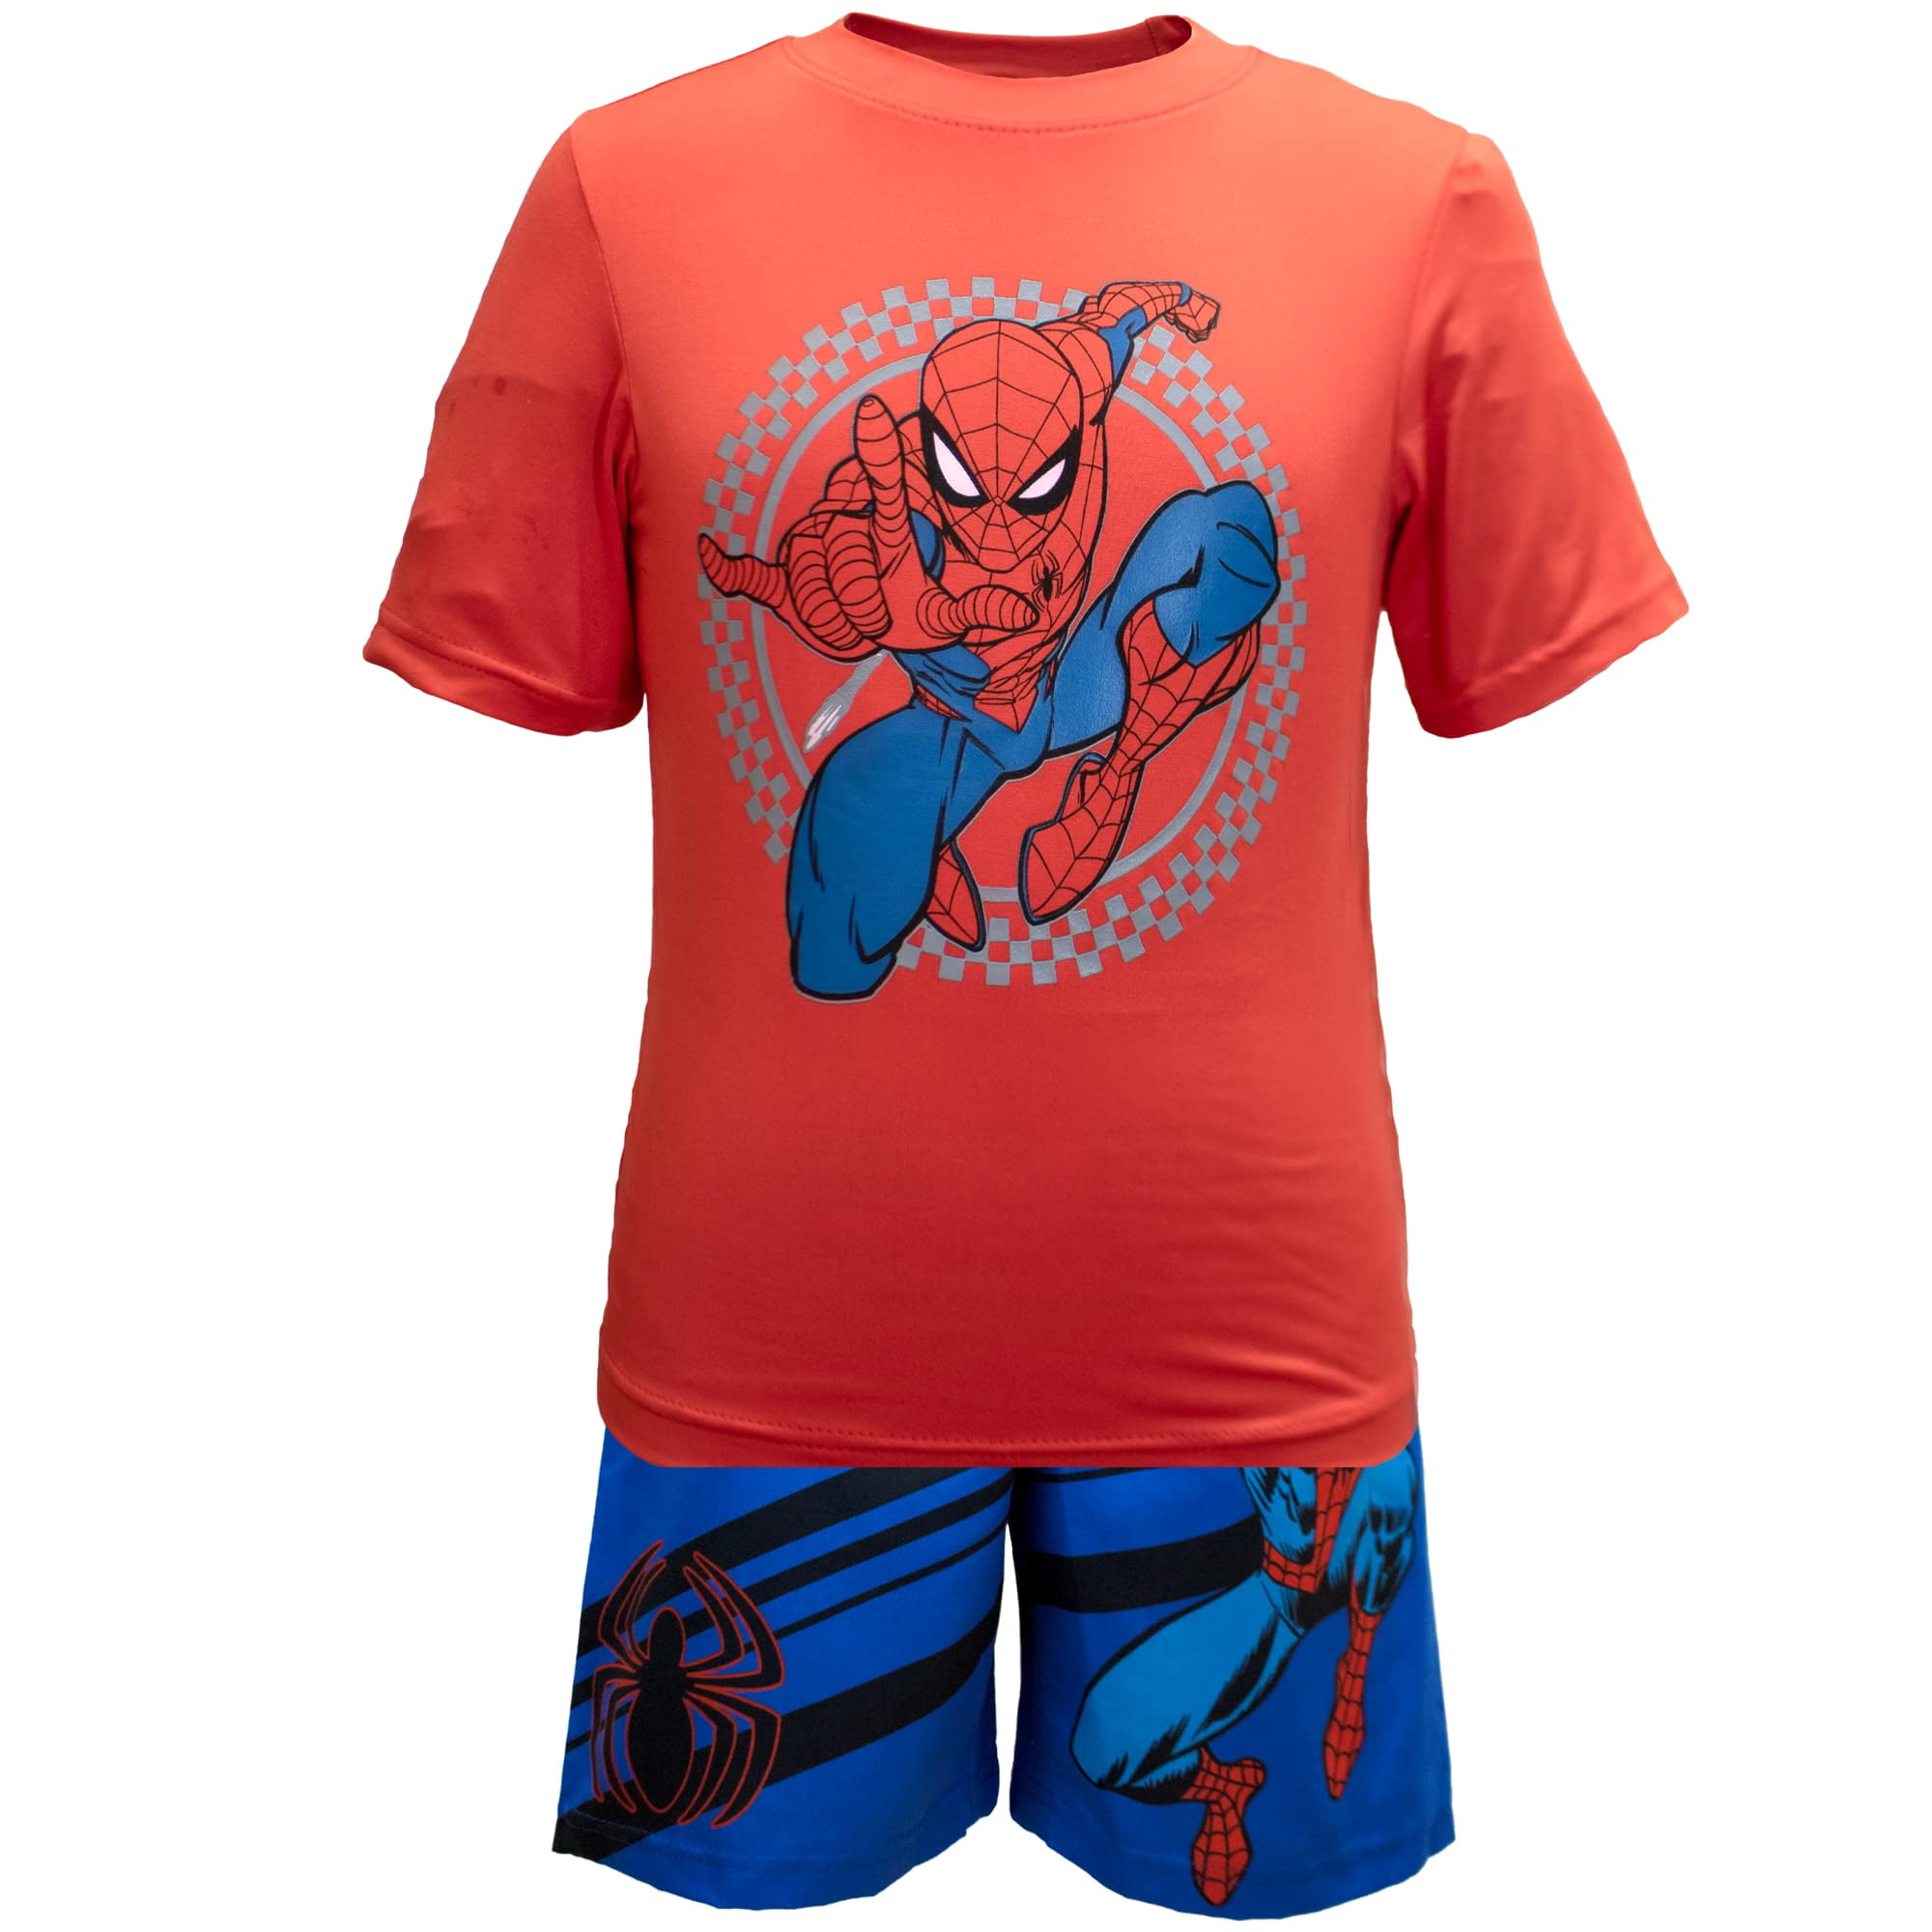 Spiderman Swimmers Sunsuit Rashie Top Sizes 2,3,4,5/6  Licensed 